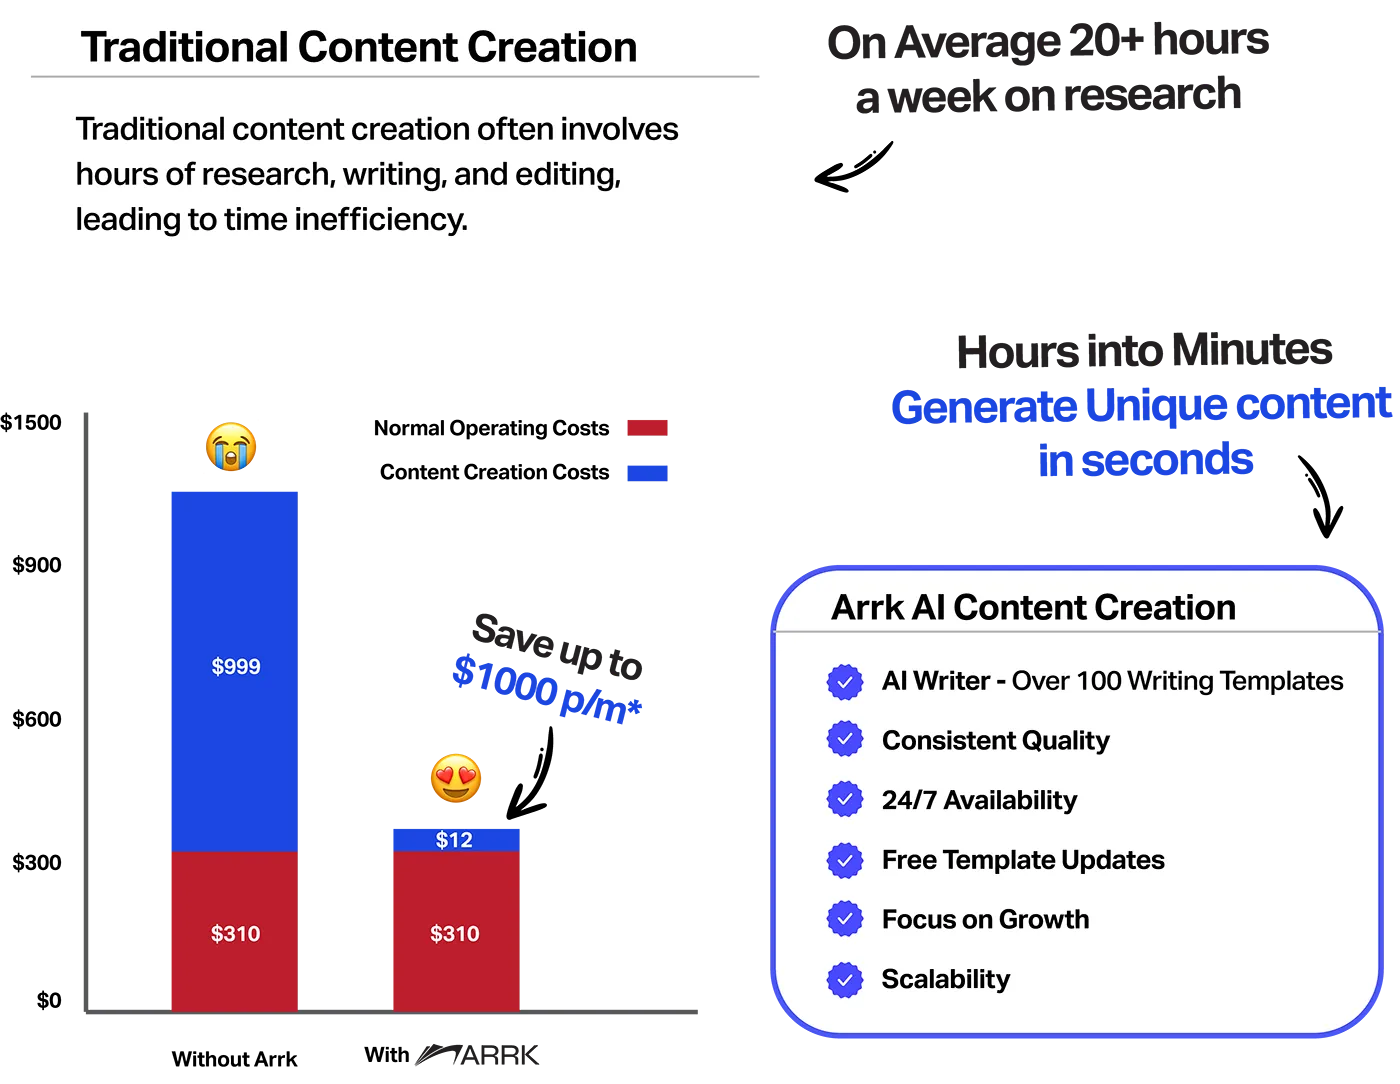 Arrk AI Saves you time and money with AI Content Creation